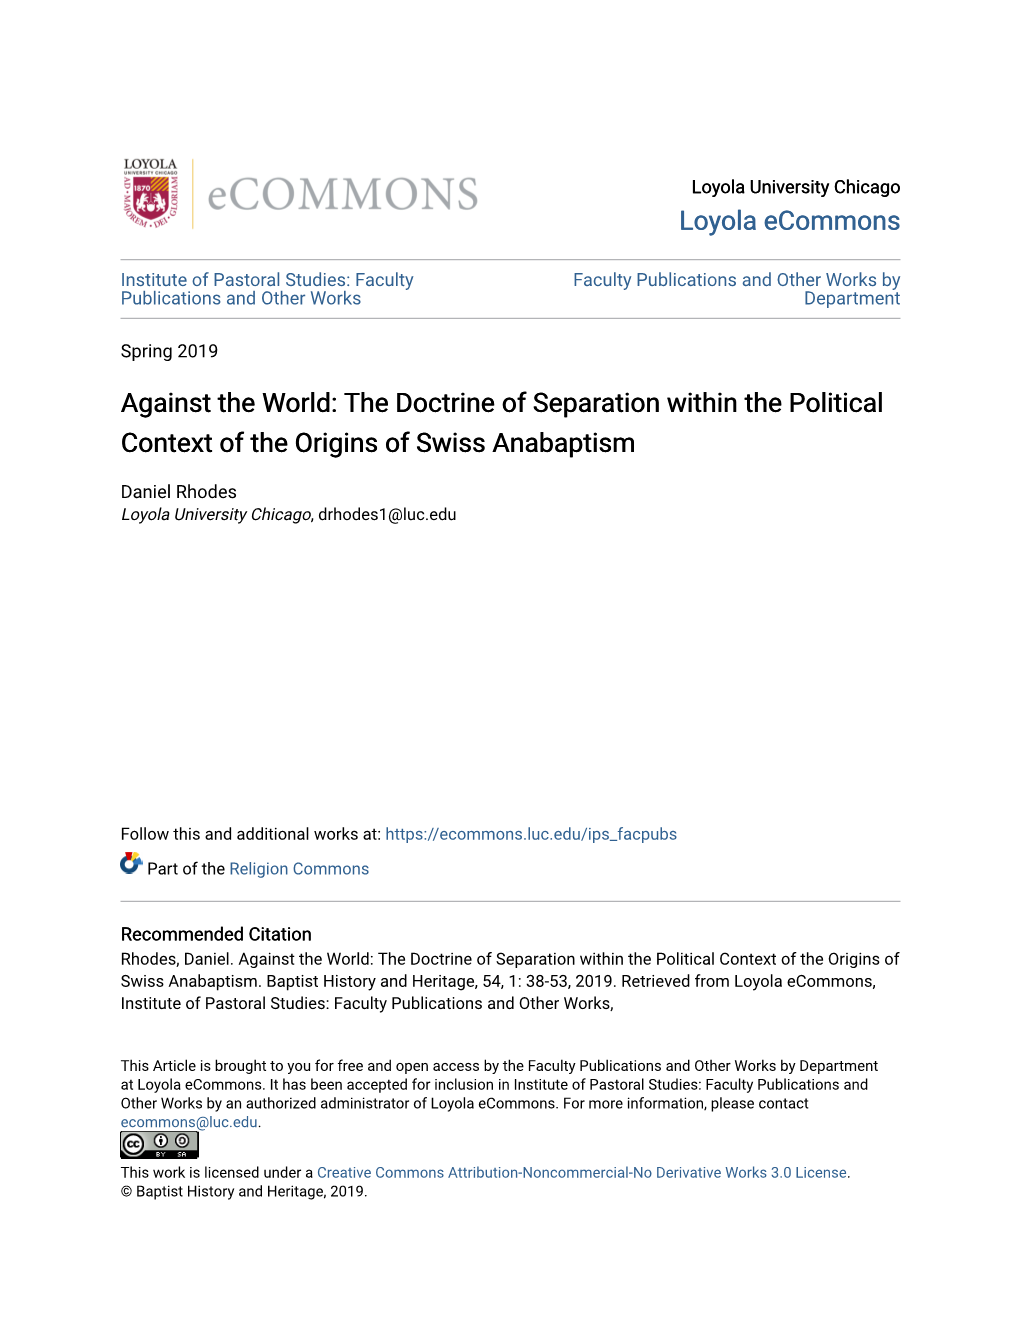 Against the World: the Doctrine of Separation Within the Political Context of the Origins of Swiss Anabaptism